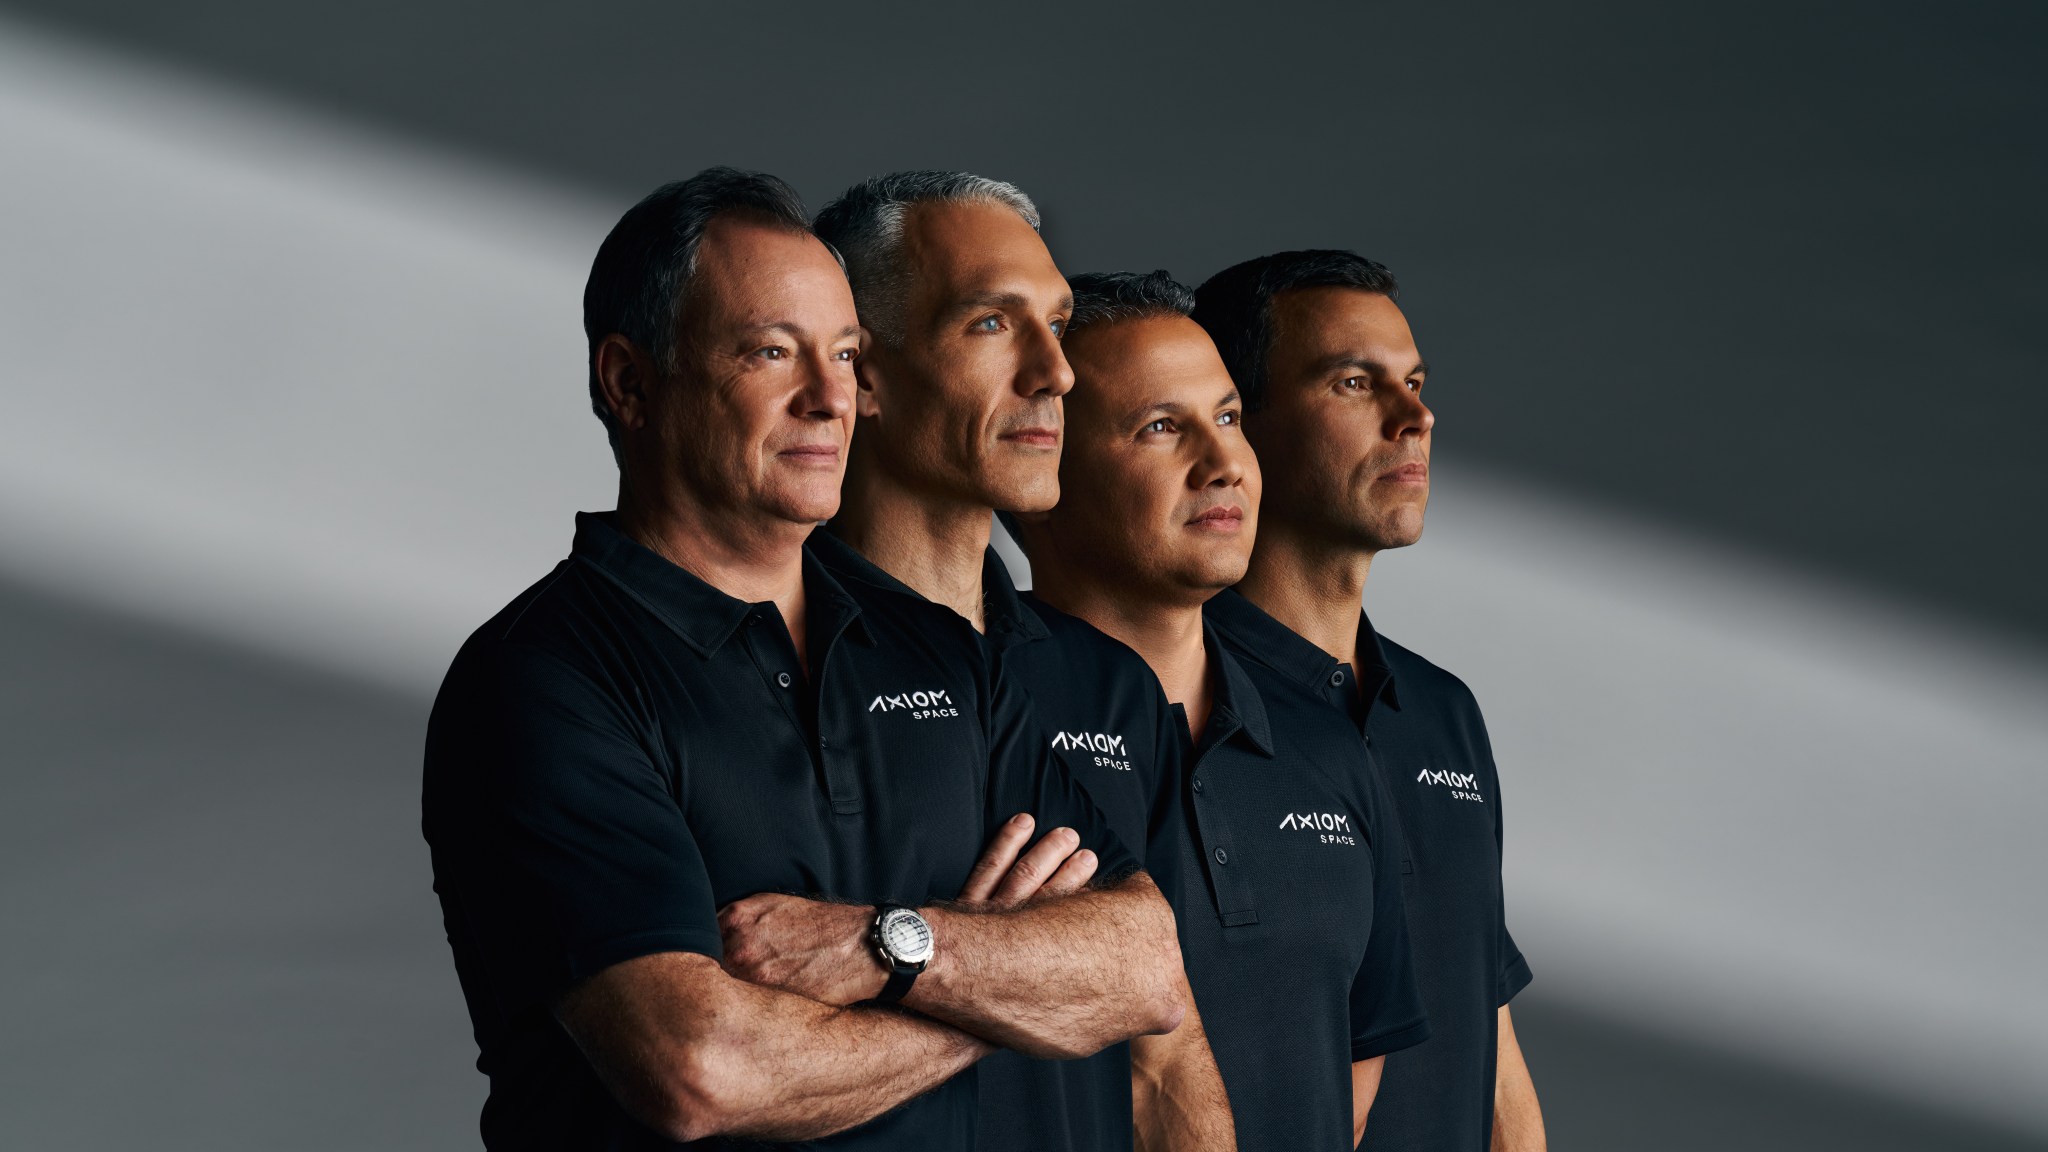 The astronaut crew for Axiom Mission 3 (Ax-3) to the International Space Station. From left to right, Ax-3 crew members are Michael López-Alegría, Axiom Space’s chief astronaut, Walter Villadei, an Italian Air Force colonel and pilot for the mission, Mission Specialist Alper Gezeravci from Türkiye, and ESA project astronaut Marcus Wandt.